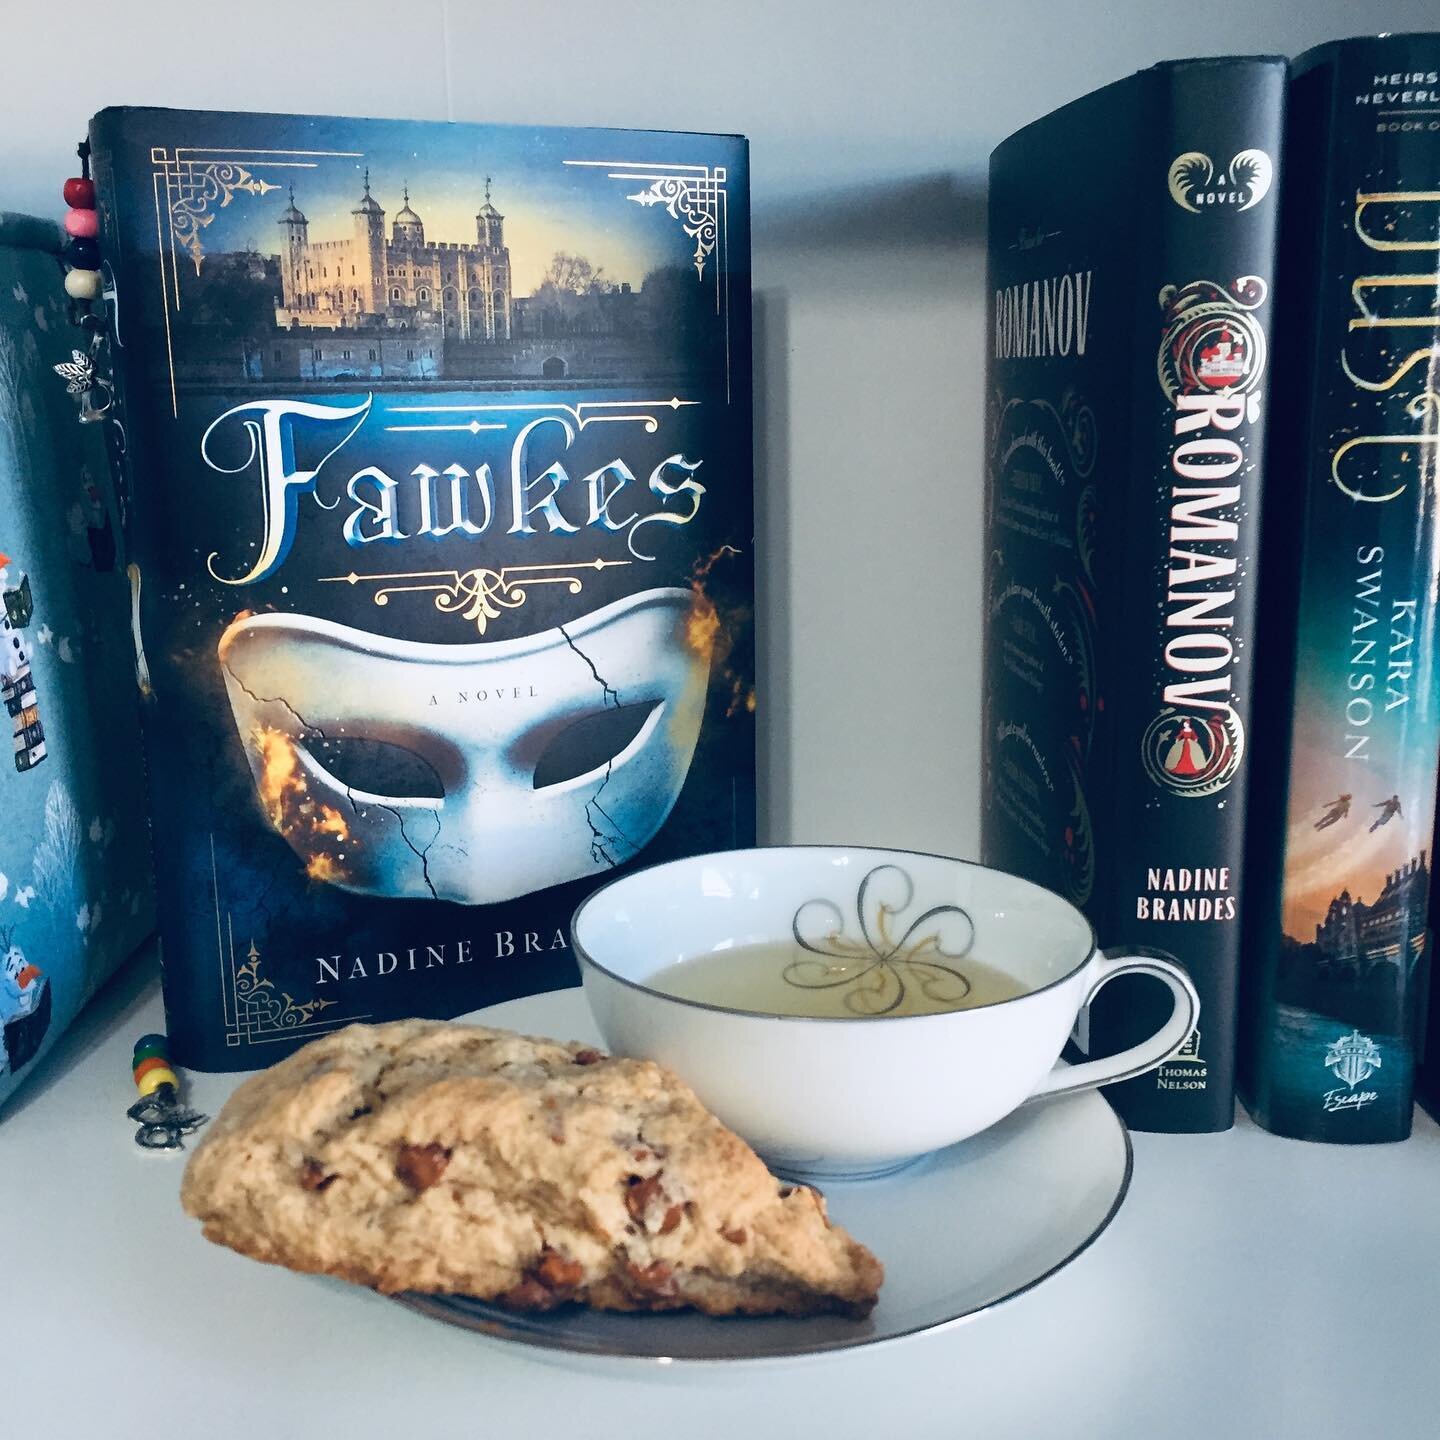 Fawkes Book Review ✨

As I write this, I&rsquo;m enjoying a cup of peppermint tea and a cinnamon scone from Pudding Lane and the @inkdrinkerbookbox. :)

The first time I started to read this, I put it down when I realized there was magic. I thought i